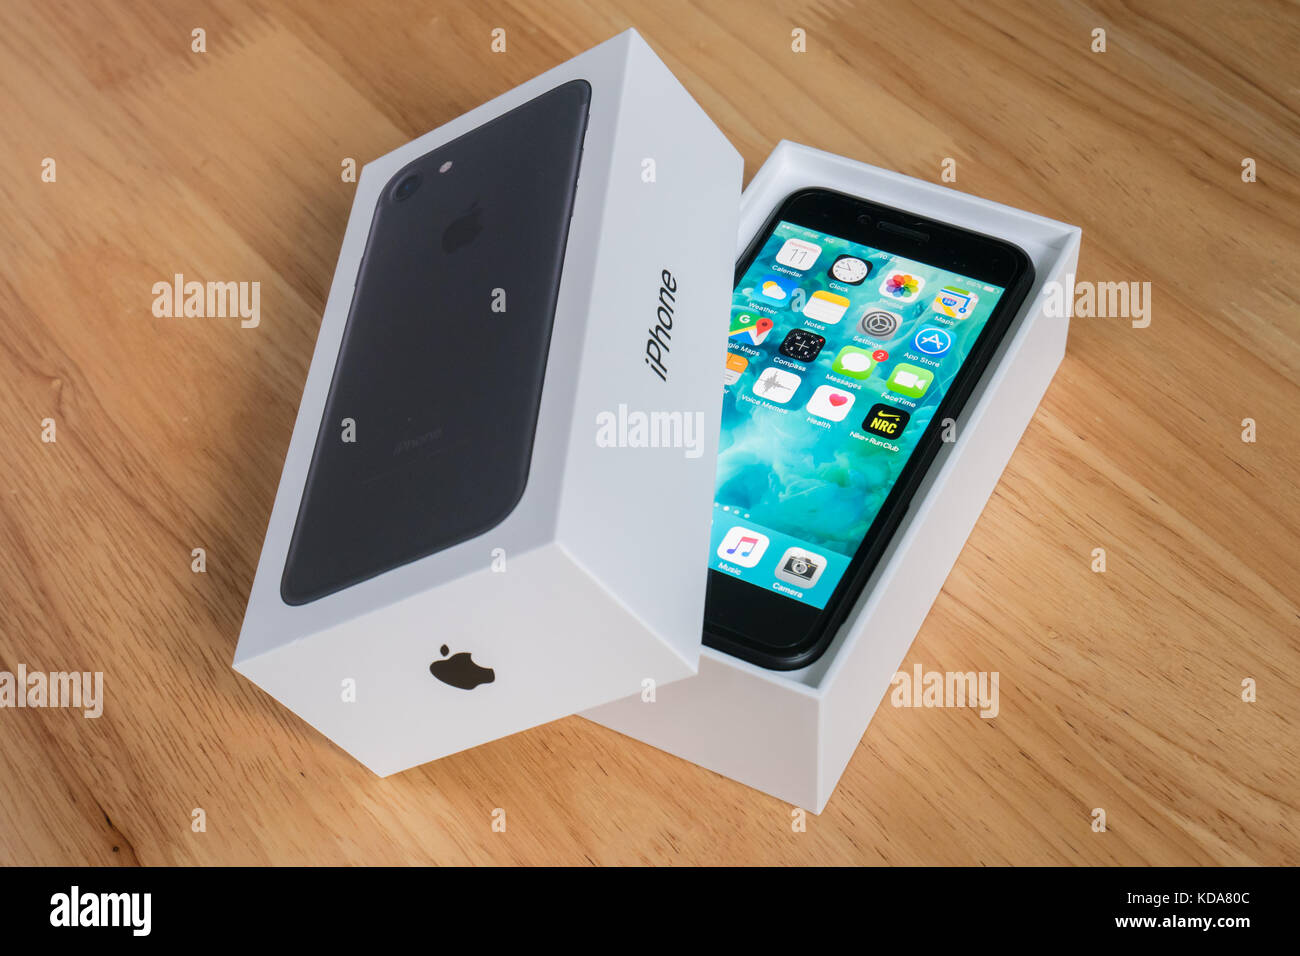 Bangkok, Thailand - October 11, 2017 : Apple iPhone 7 in the box package. Stock Photo